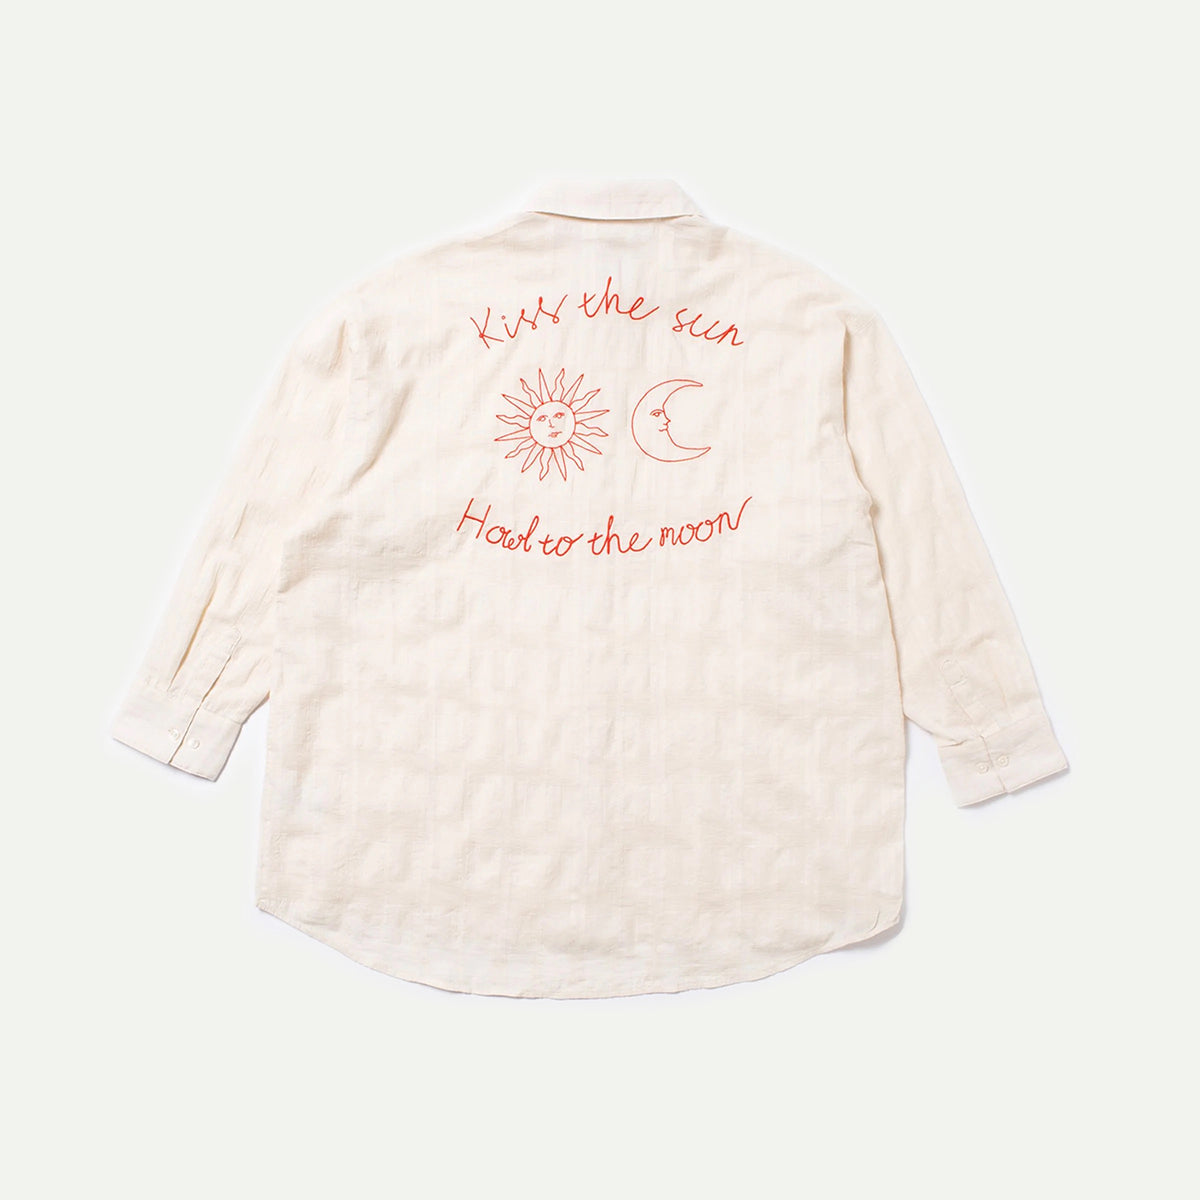 Nudie Monica Off White Embroidery Shirt